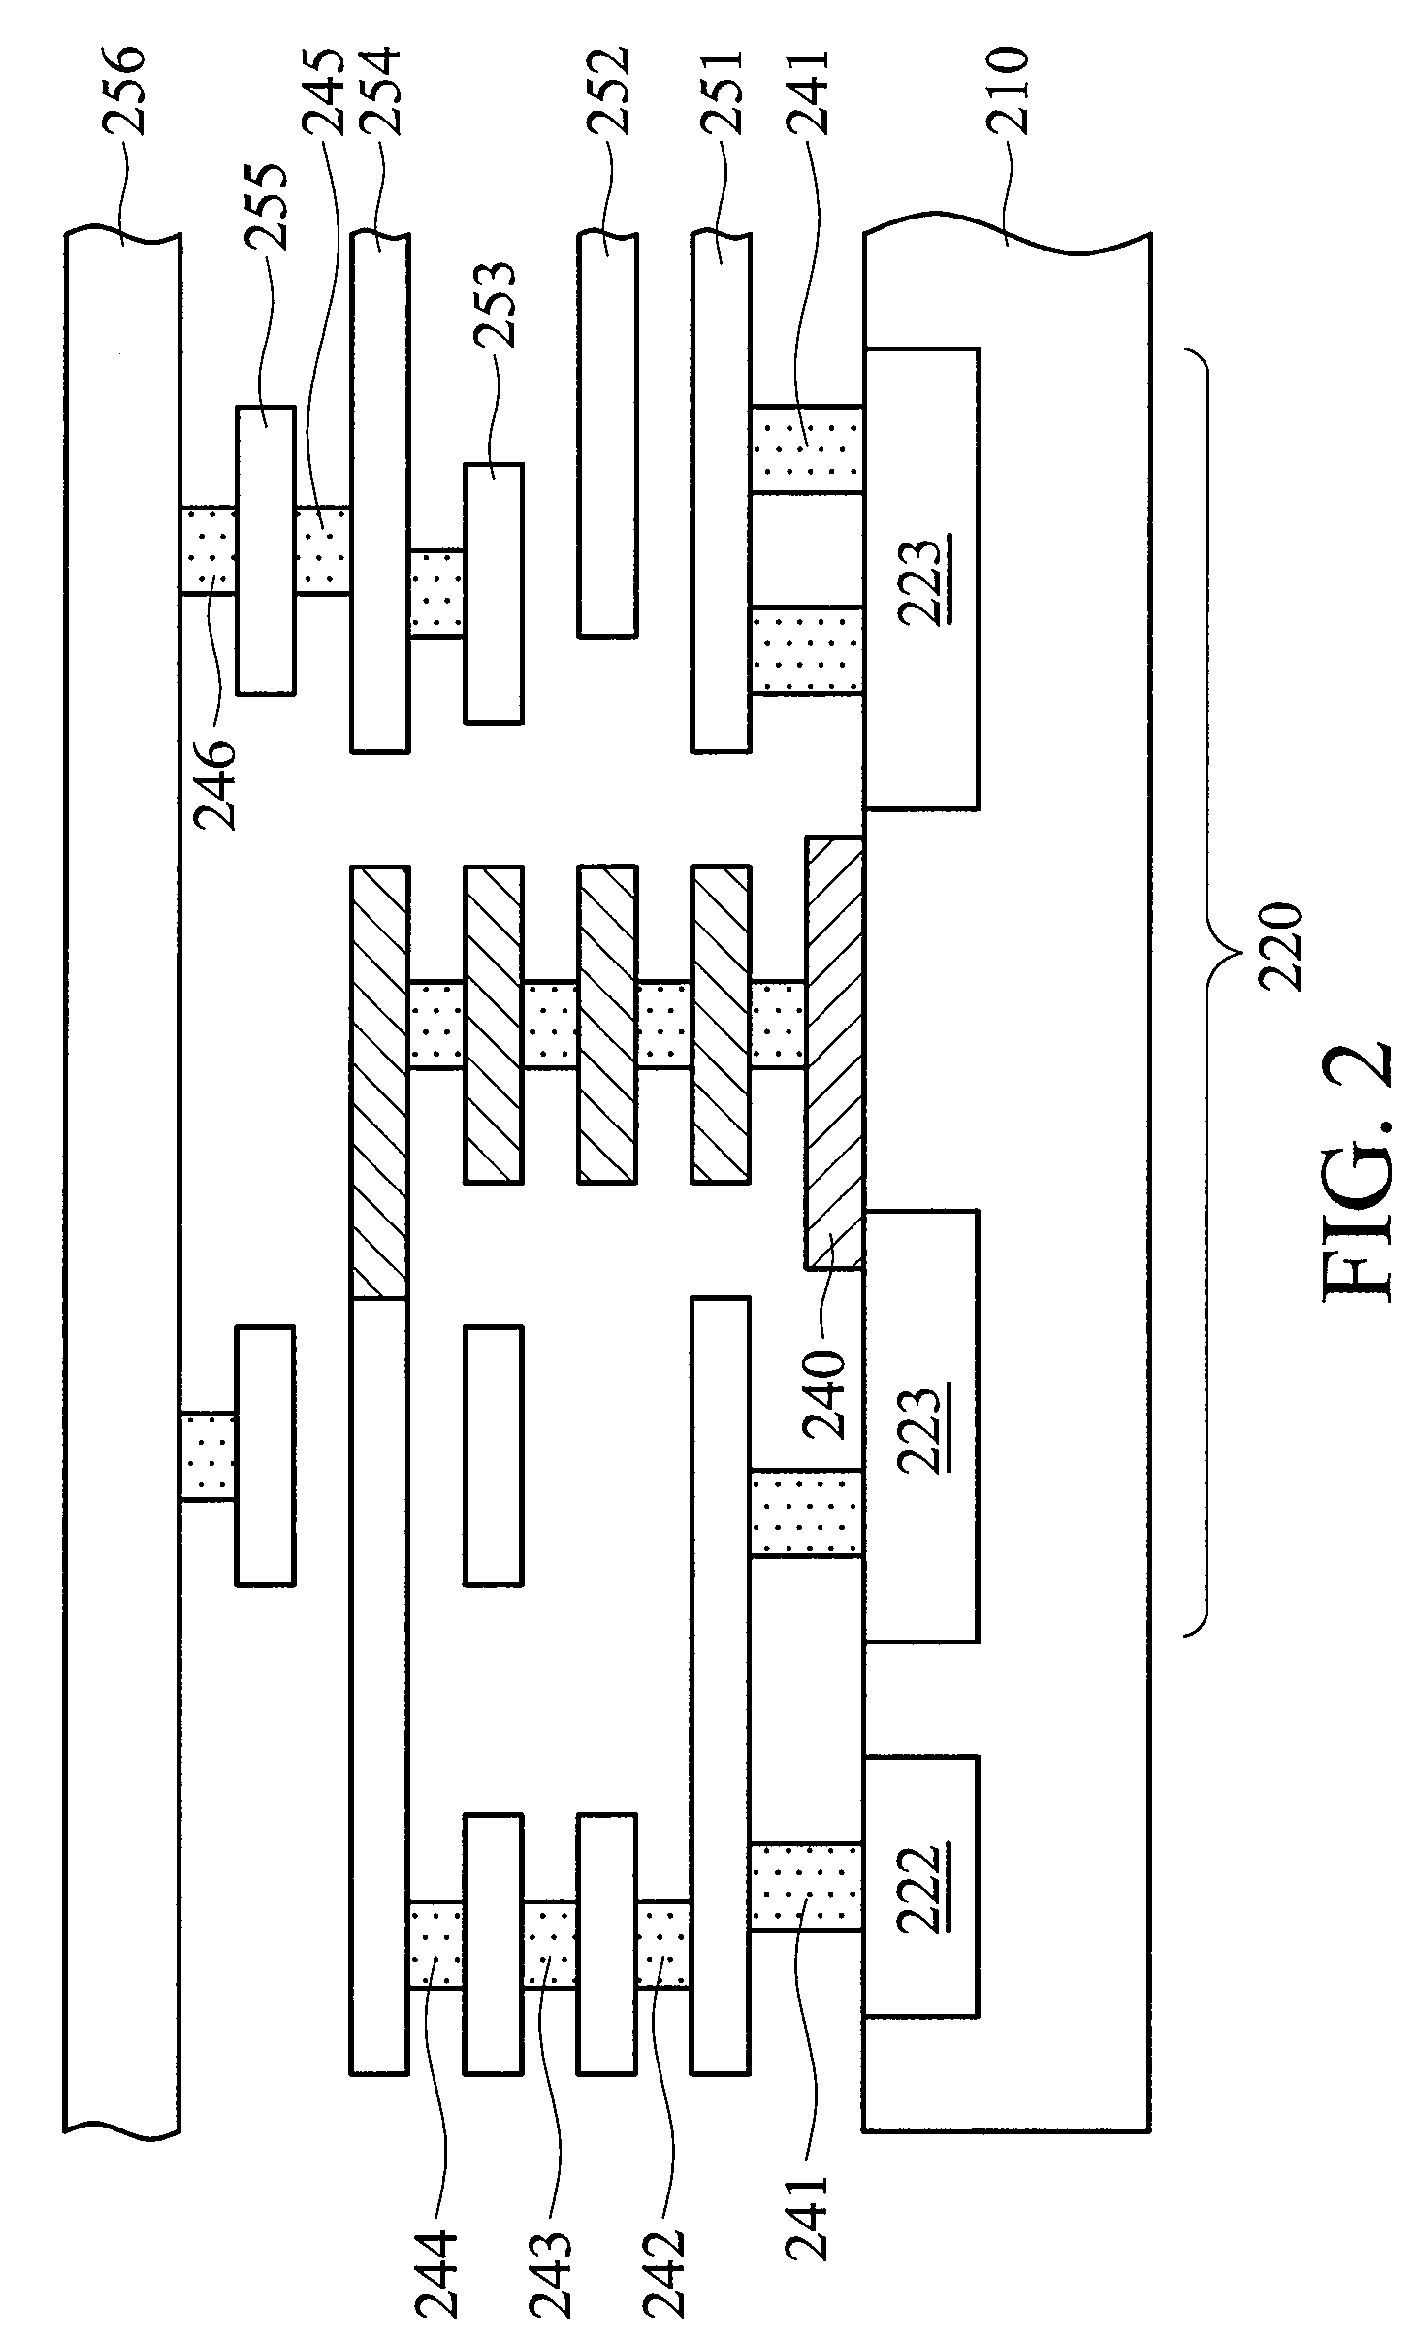 Integrated circuit with spare cells